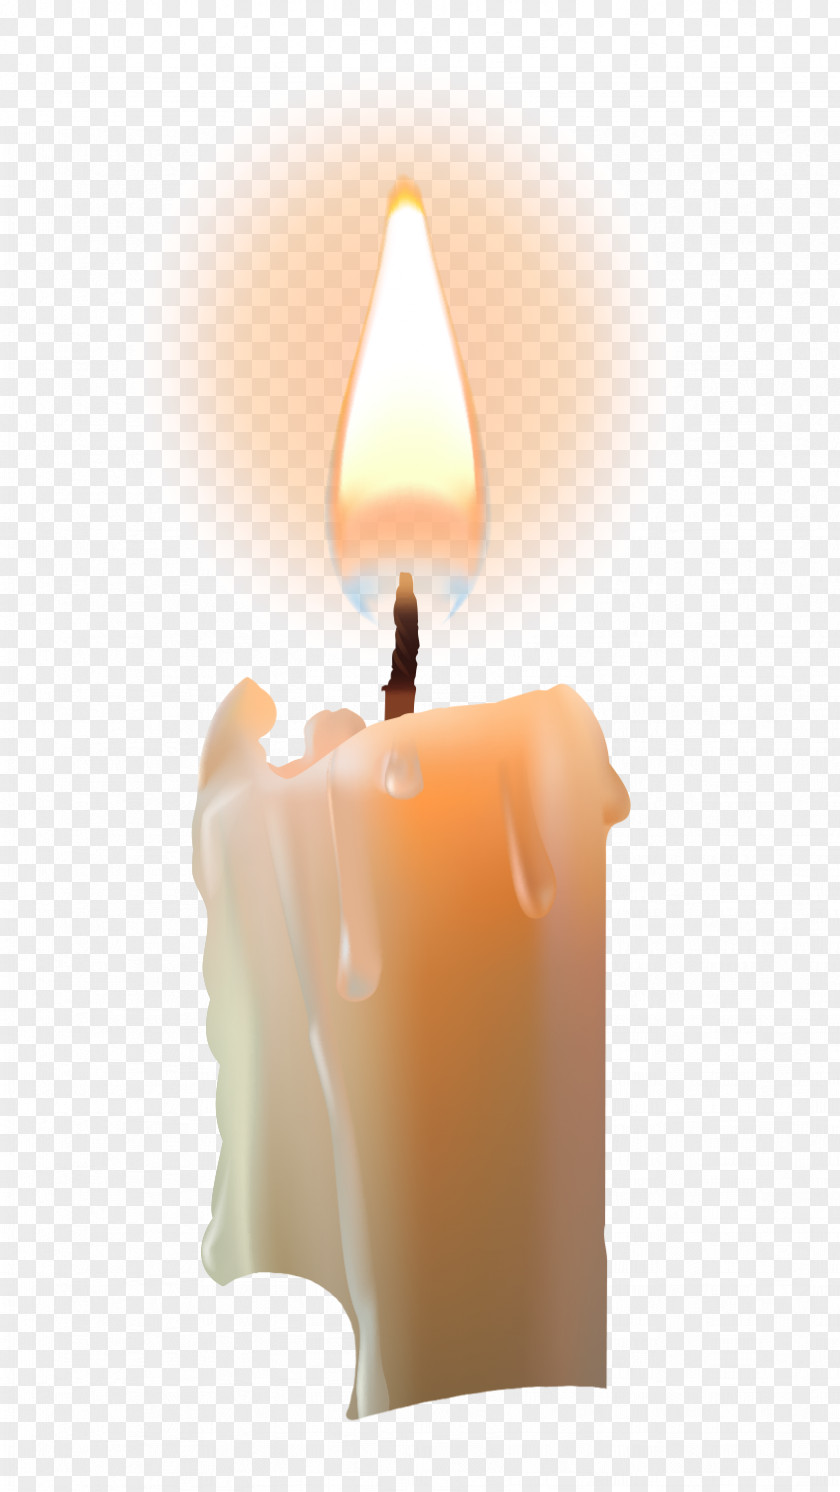 Candle For Blessing Computer File PNG